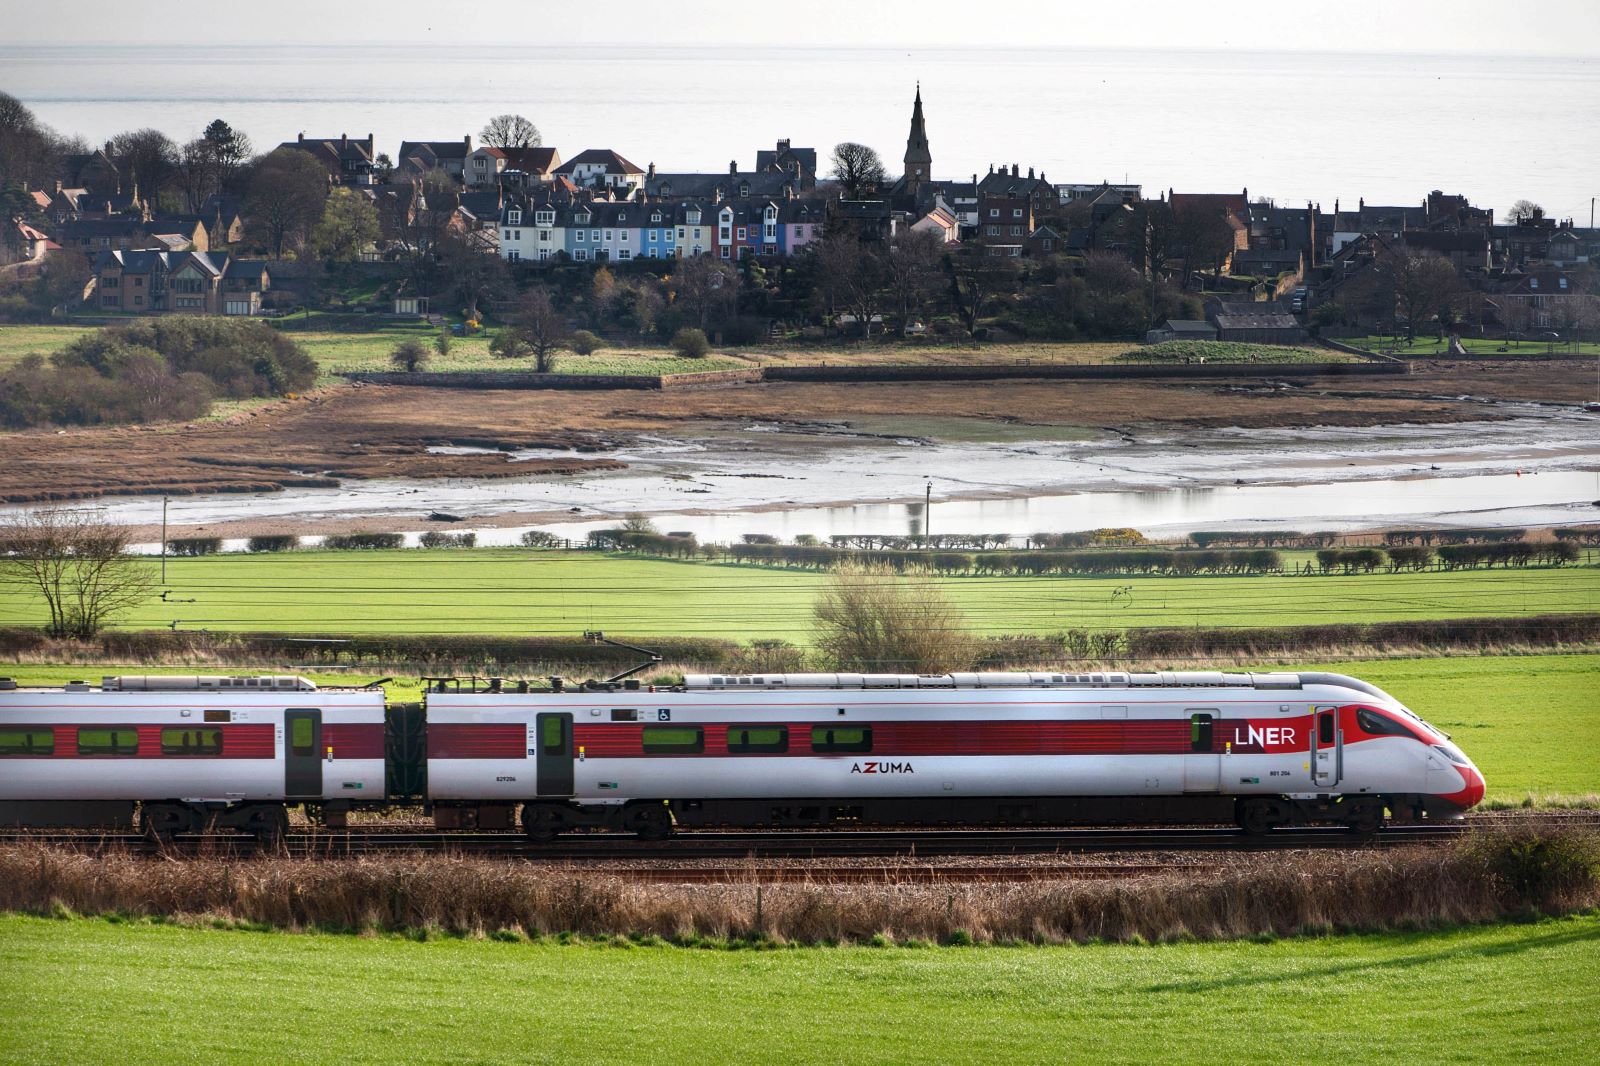 LNER Offers Advance Tickets For First Time On Almost 200 New Journey Combinations